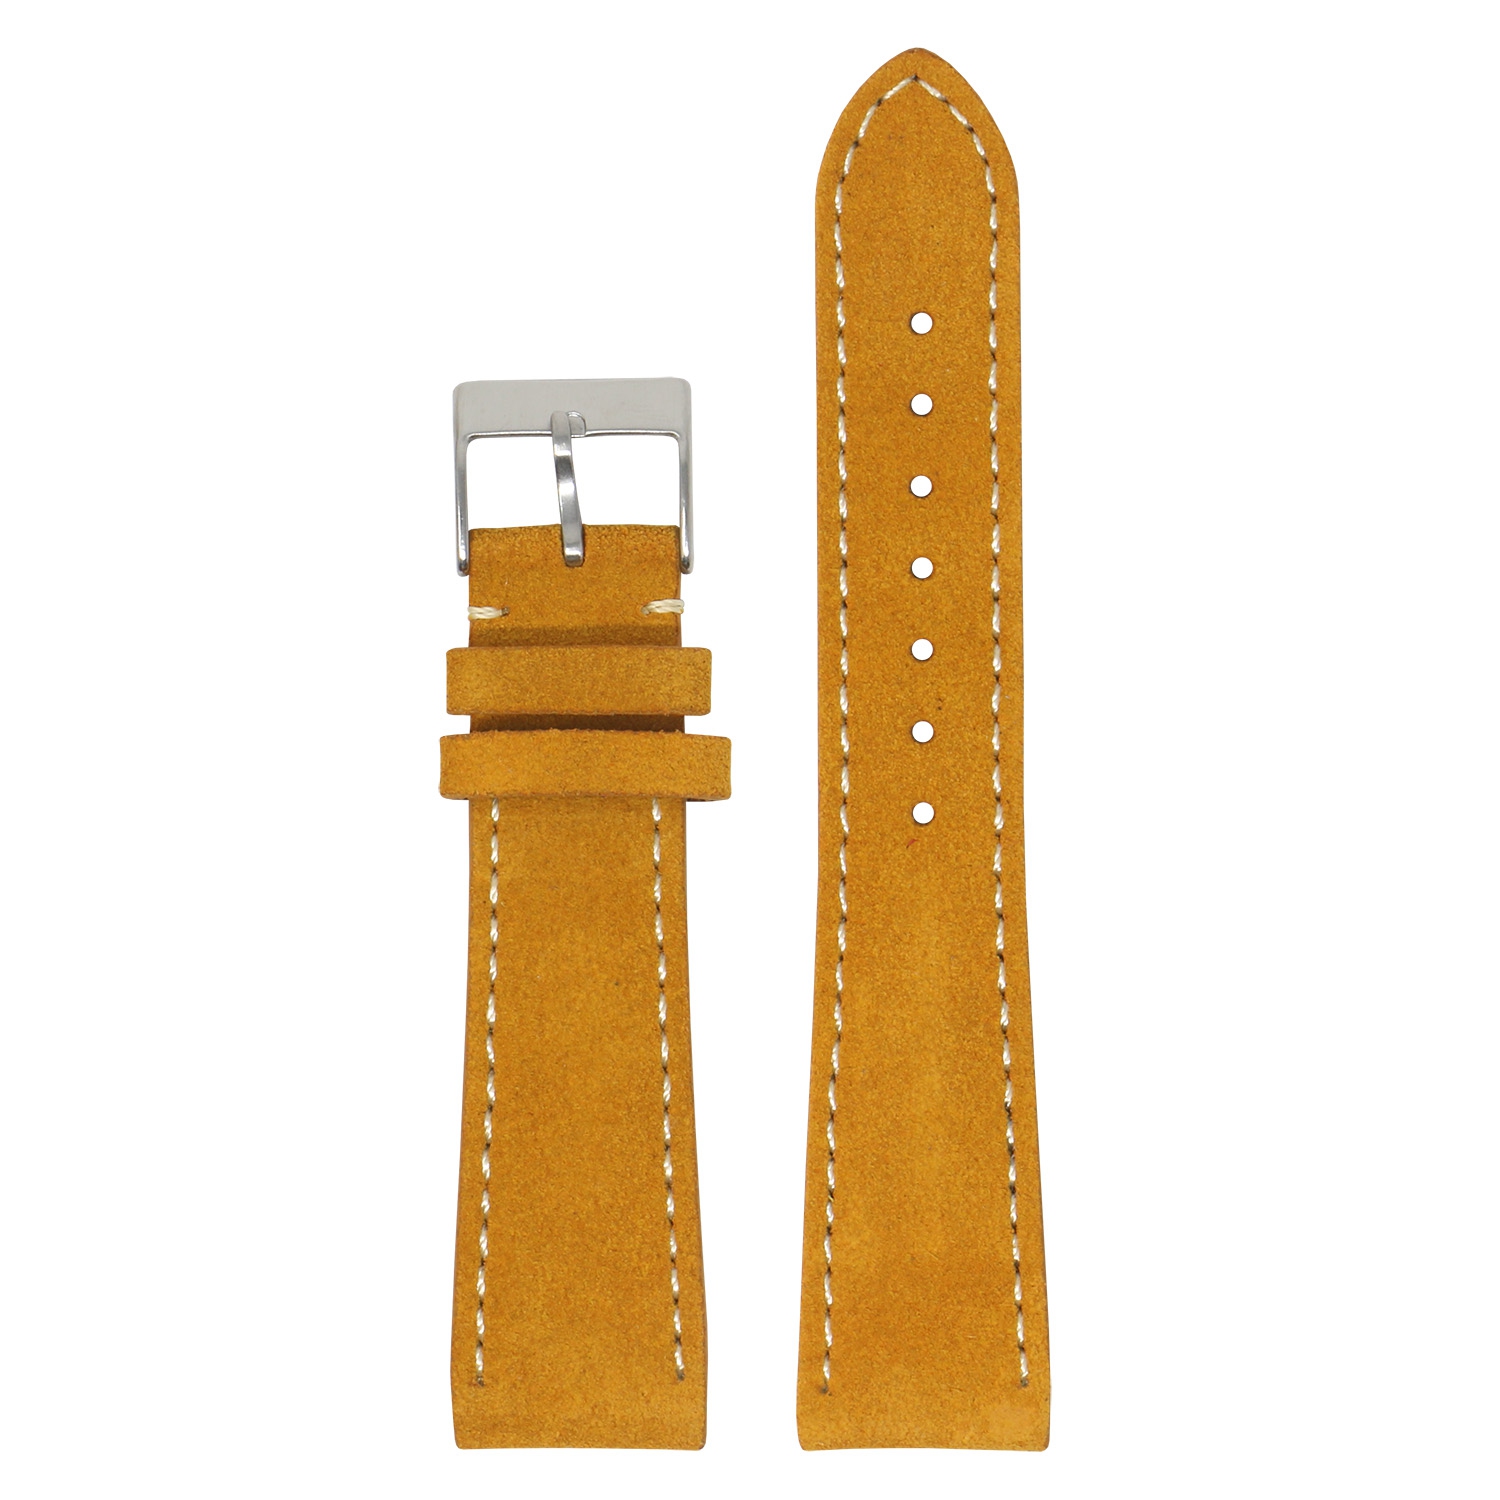 StrapsCo Classic Suede (Short, Standard, Long) Watch Band Strap for Samsung Galaxy Watch 3 - Long Length - 22mm - For 45mm Galaxy Watch3 - Orange